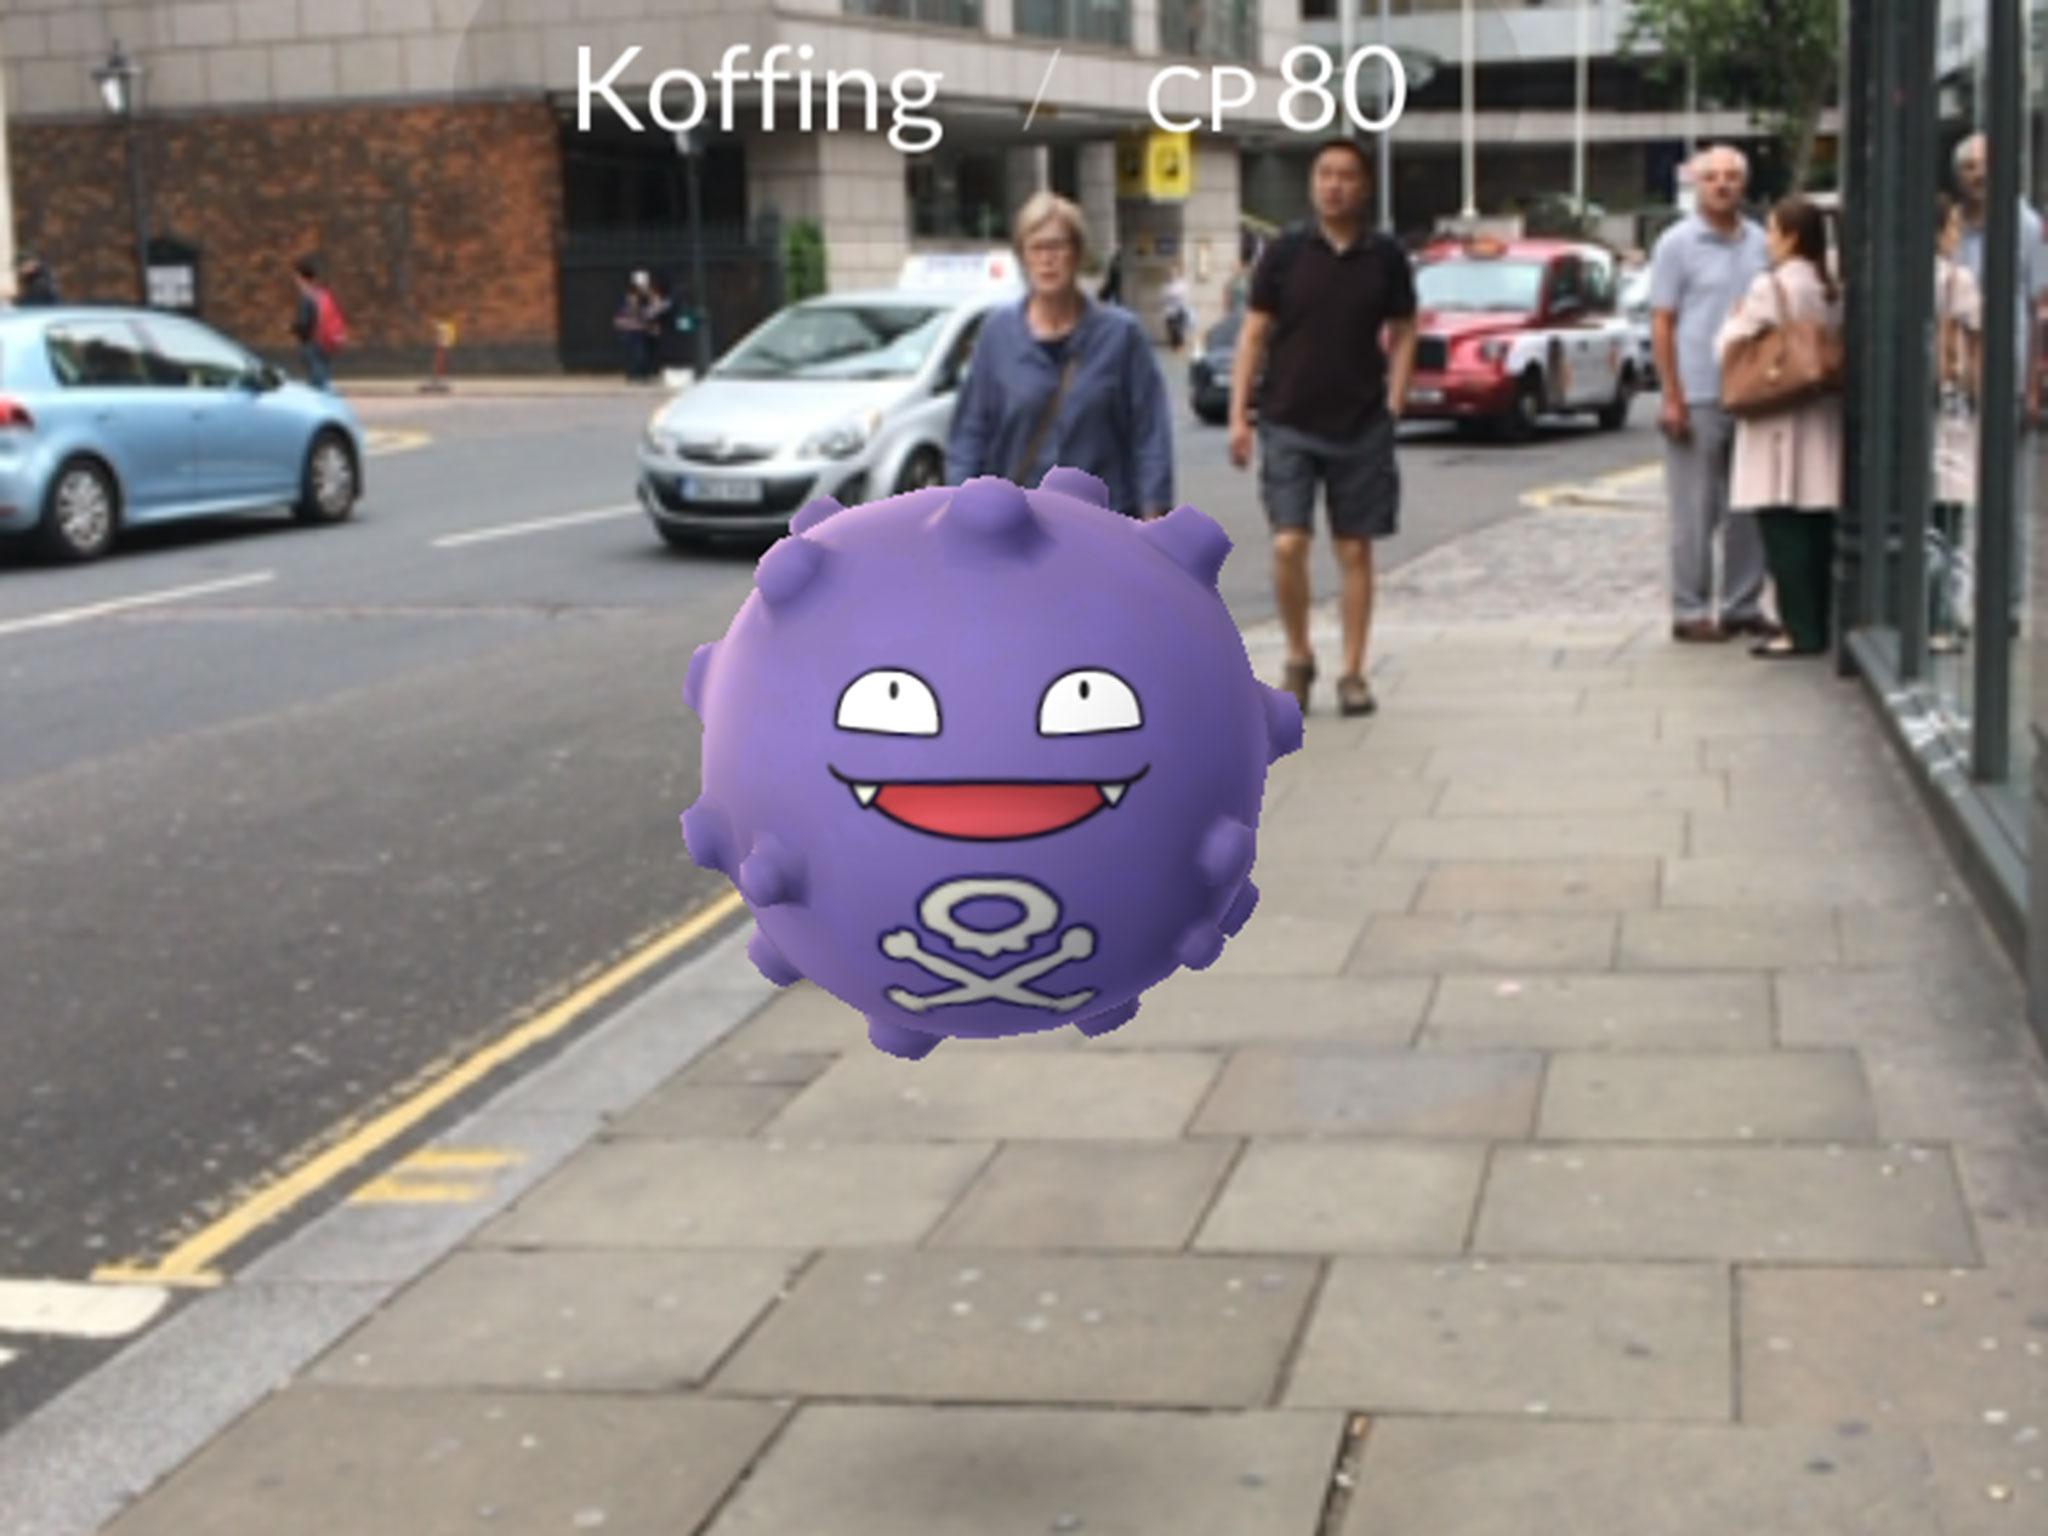 Players catch Pokemon characters which appear on the screen of a smartphone